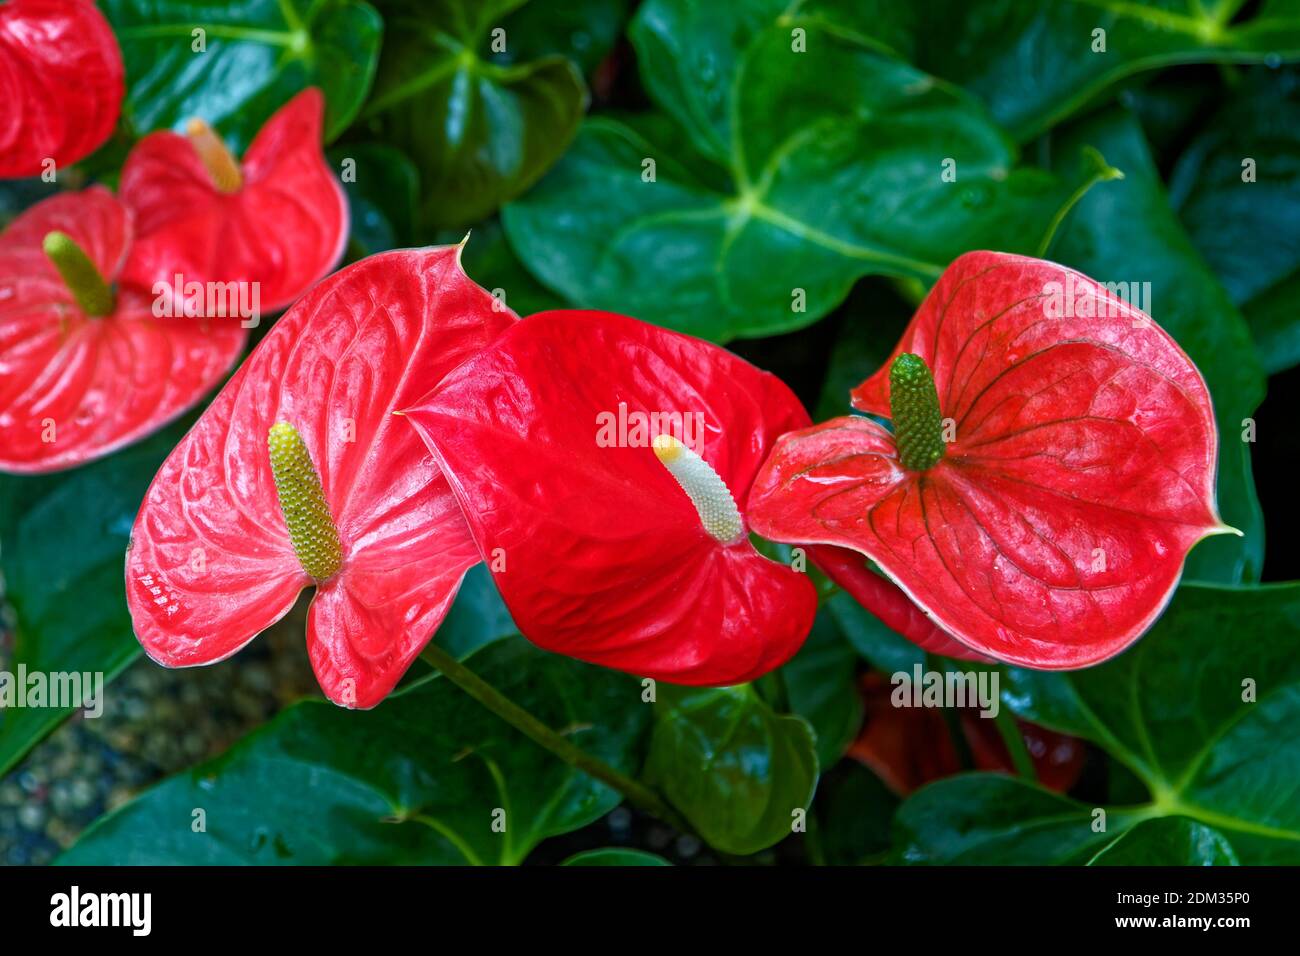 anthuriums, Flamingo flowers, Araceae, arum family, tropical, cultivated flowers, bright red, large green leaves, nature Stock Photo